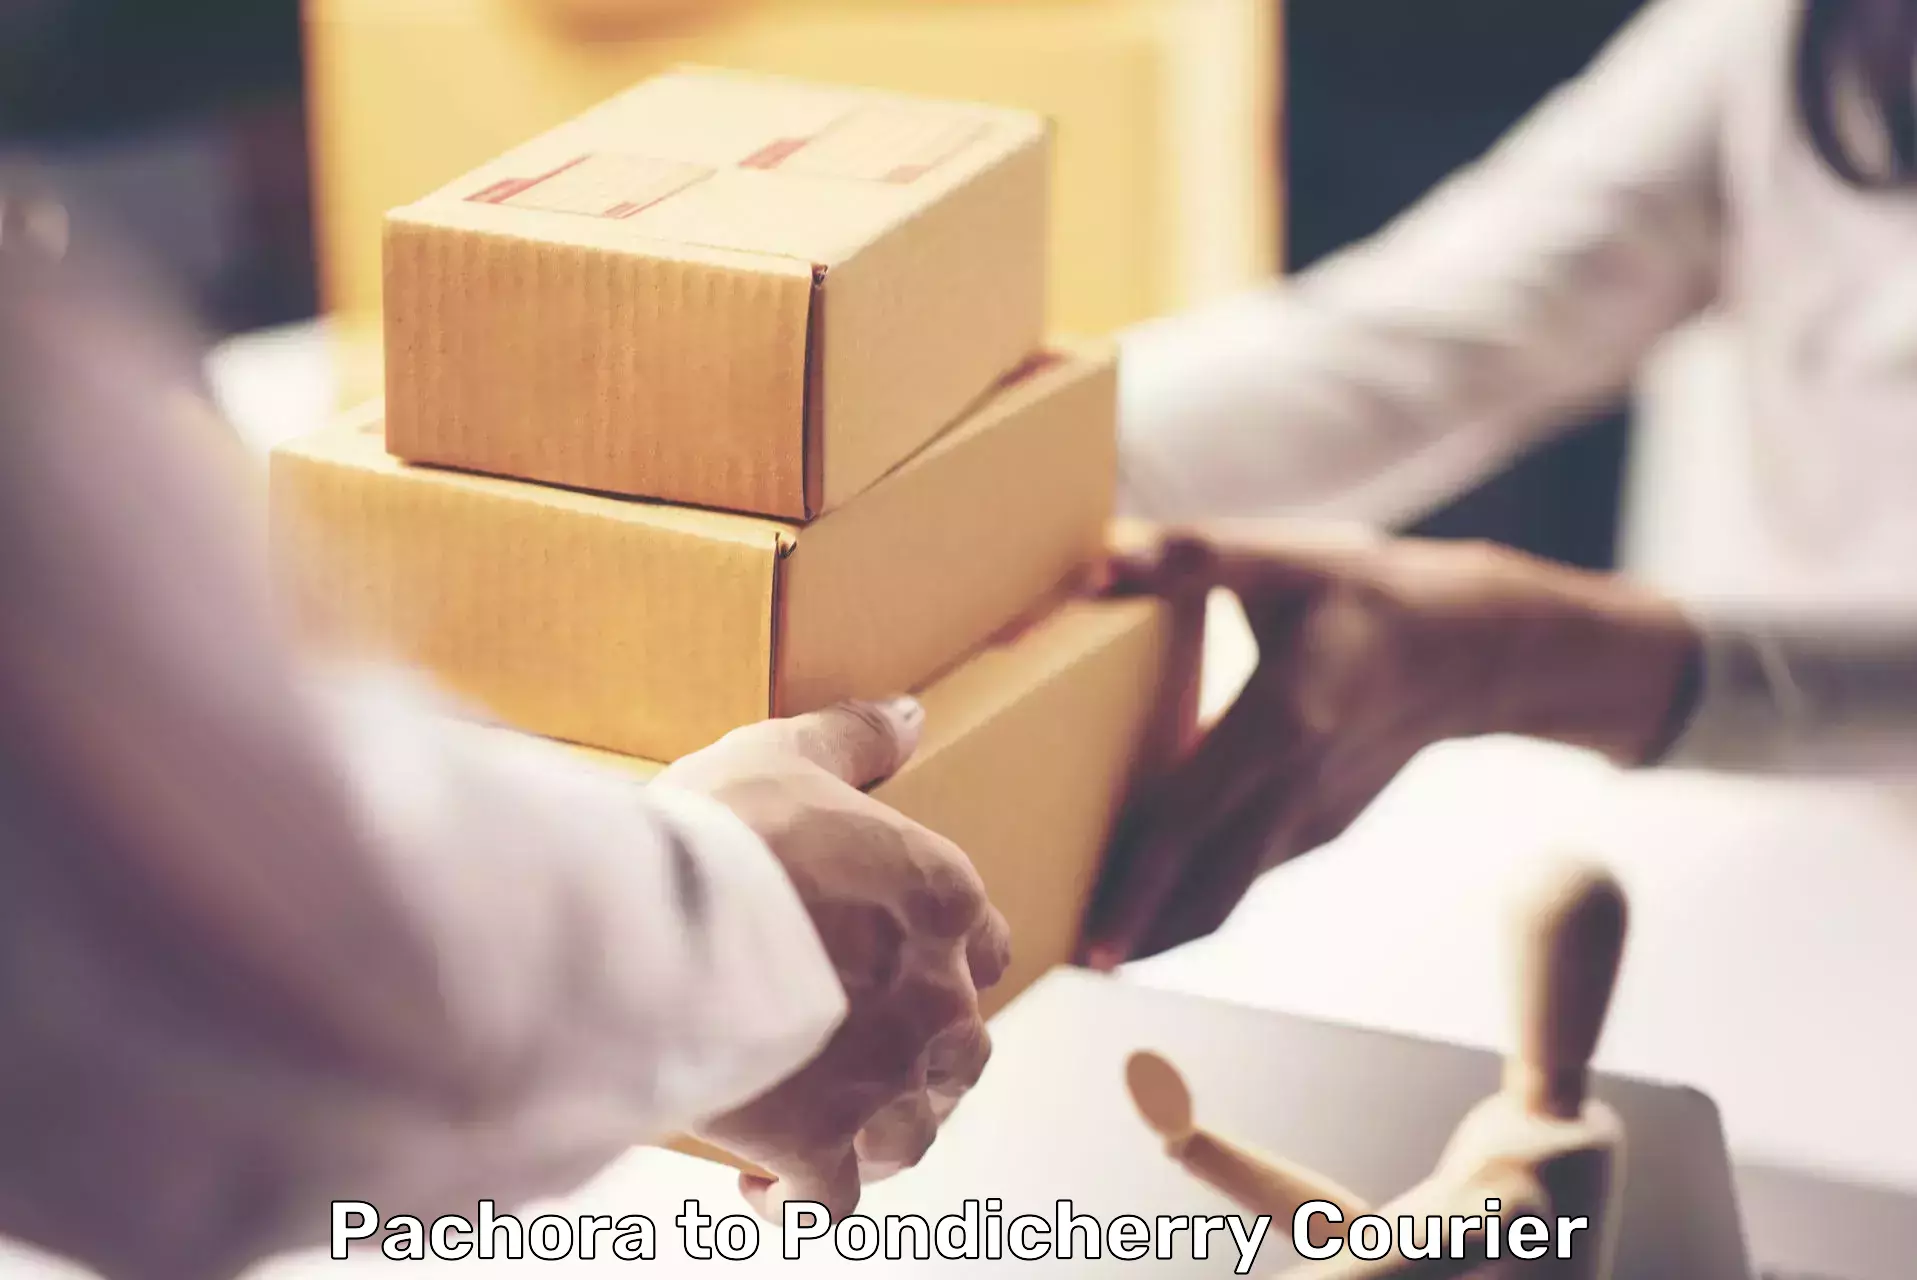 Dynamic courier operations Pachora to Pondicherry